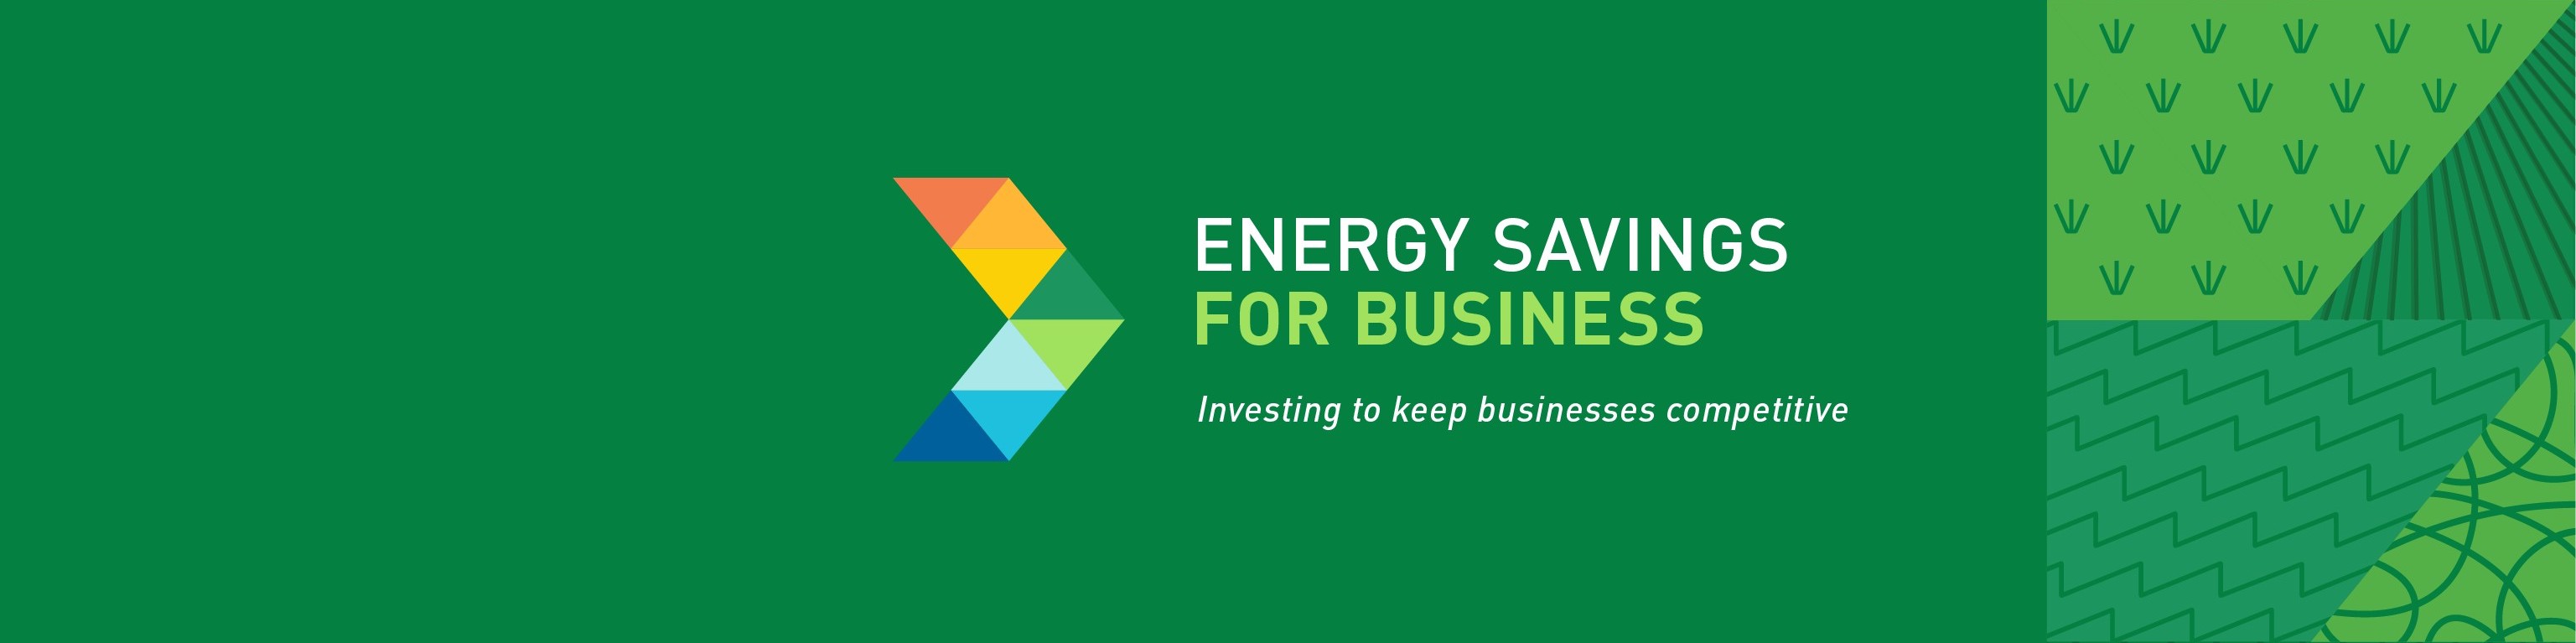 Energy Savings for Business Program by ERA edmonton ab electrical contractor